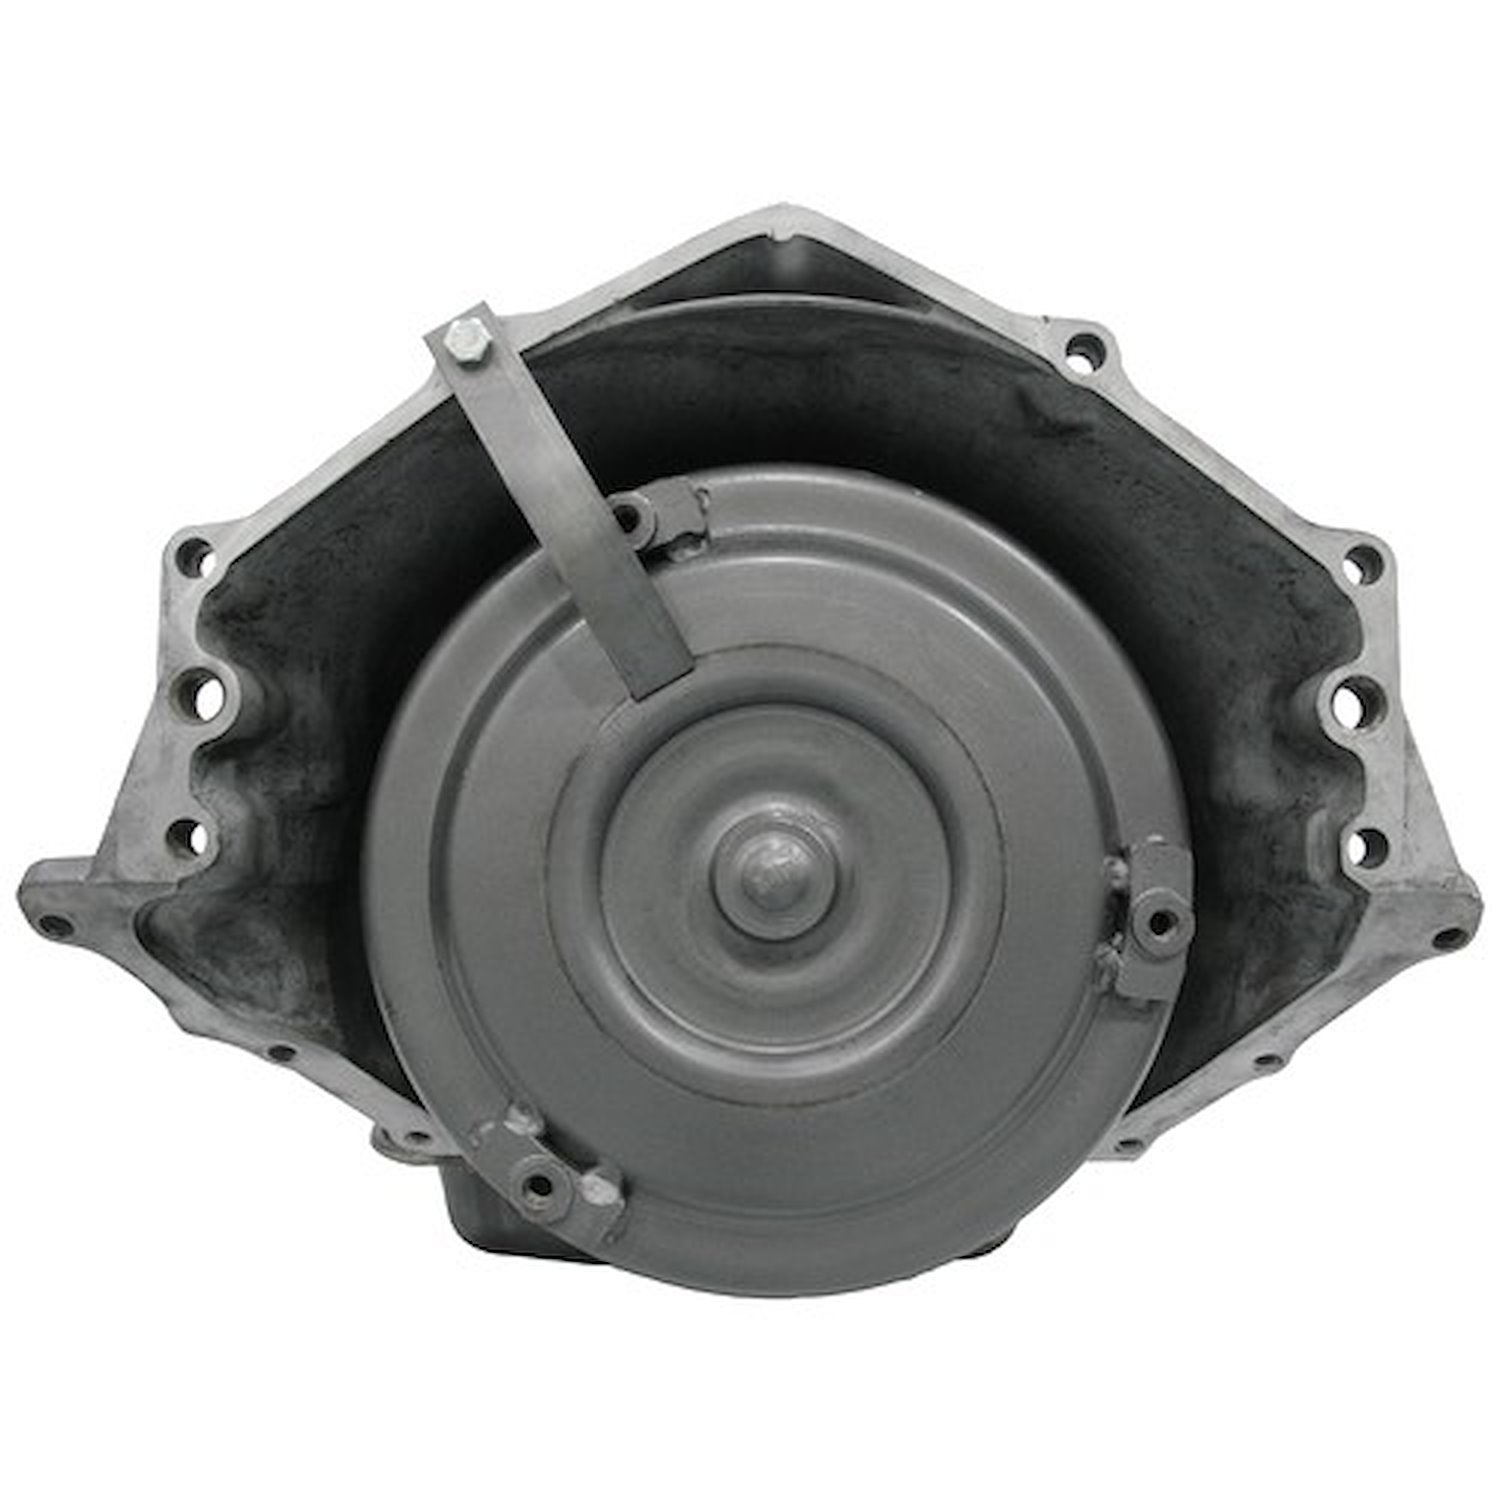 4F27E Reman Auto Trans Fits 2011-2013 Ford Transit Connect w/2.0L 4cyl. Eng.